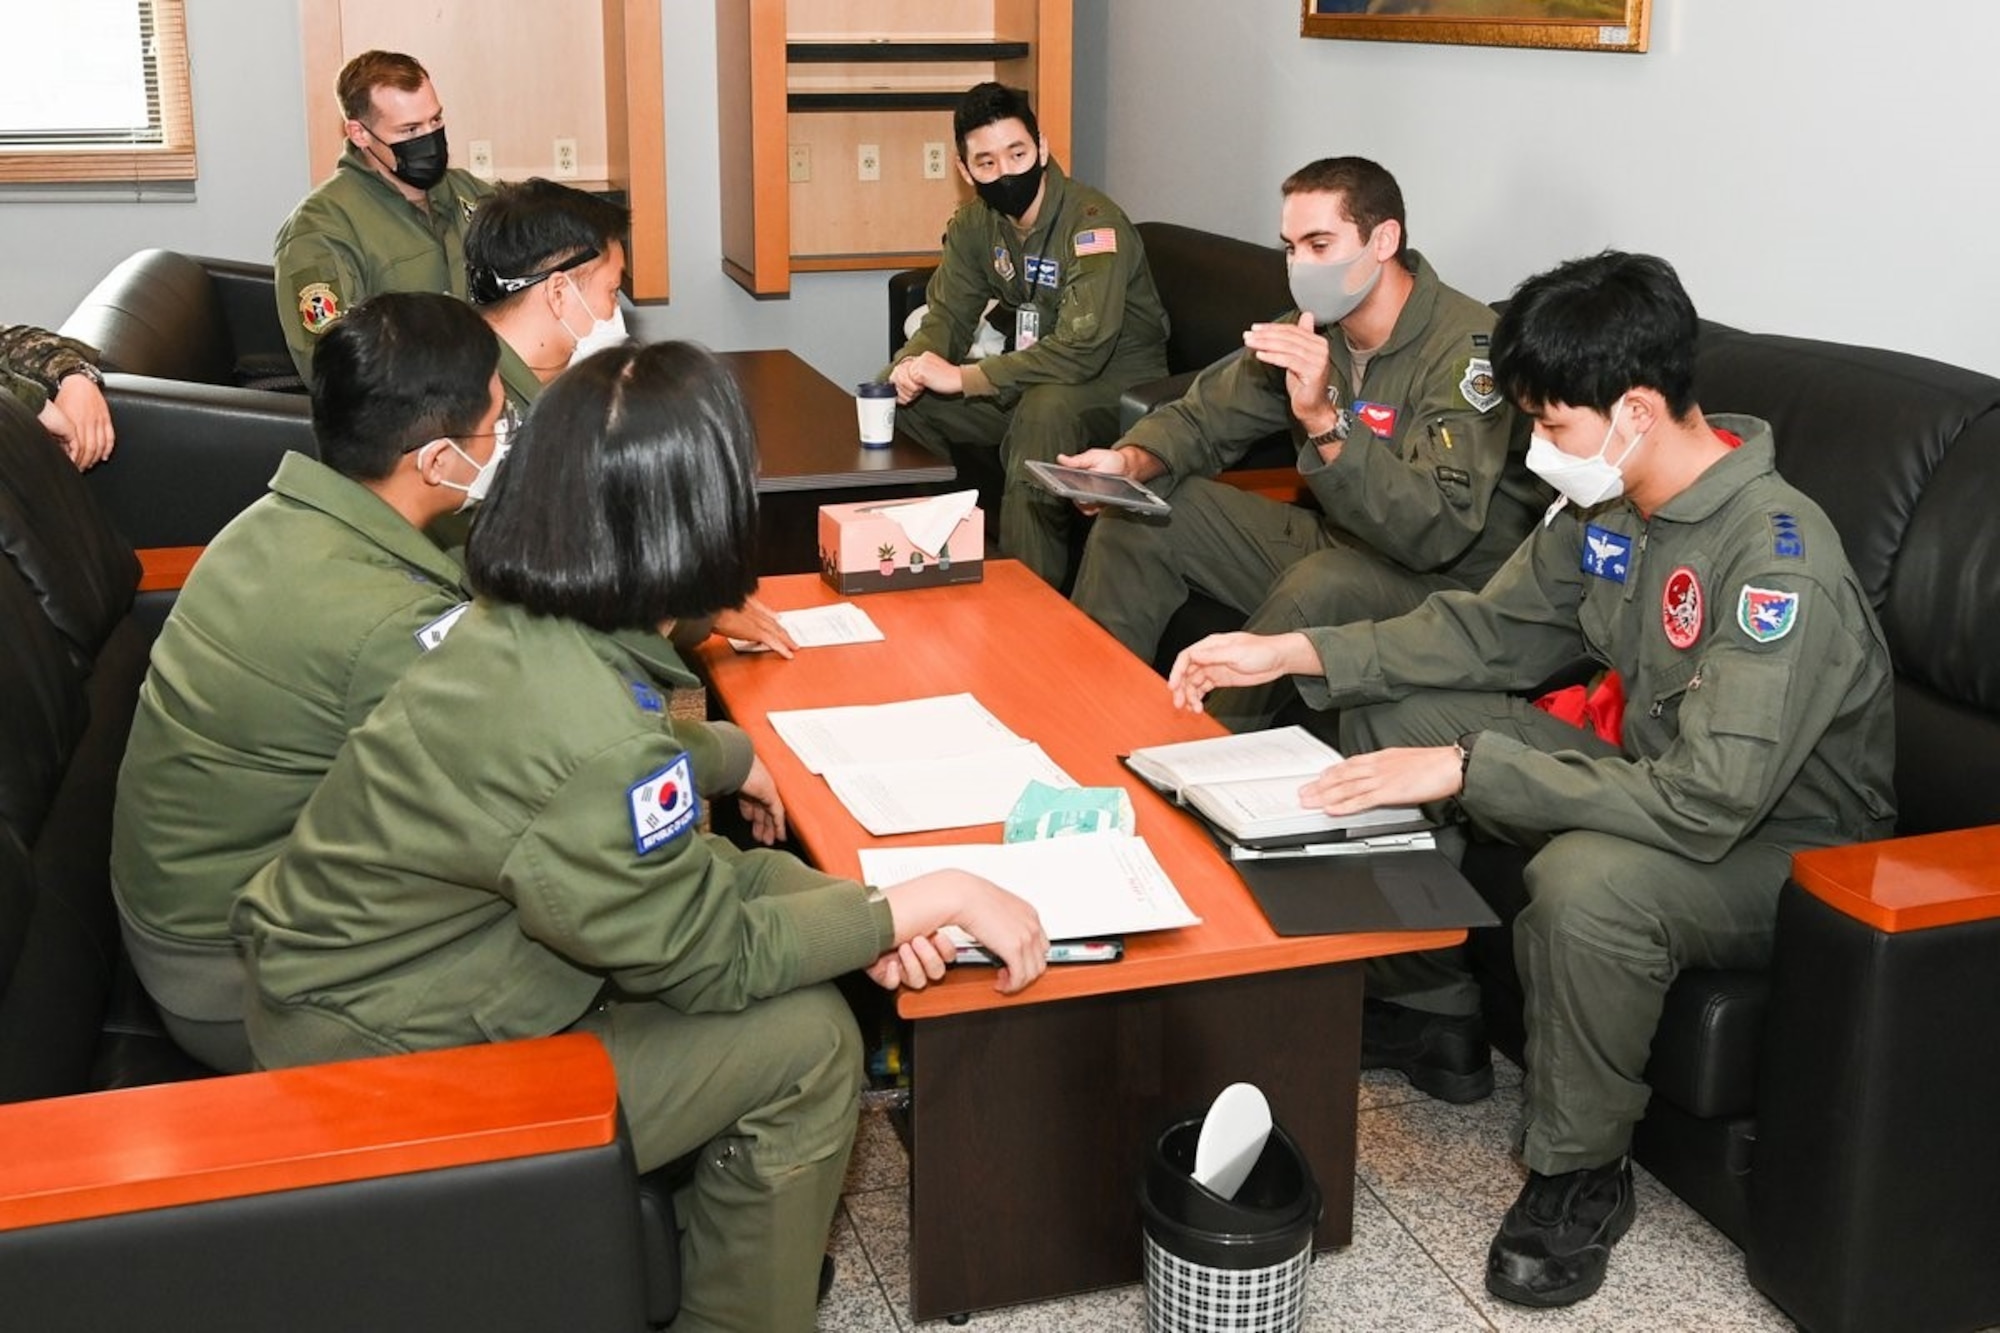 Republic of Korea and U.S. Air Force Airmen discuss plans for Operation Christmas Drop at Osan Air Base, Republic of Korea October 22, 2021. This year marks the 70th anniversary of the mission. (Courtesy photo from Republic of Korea Air Force)